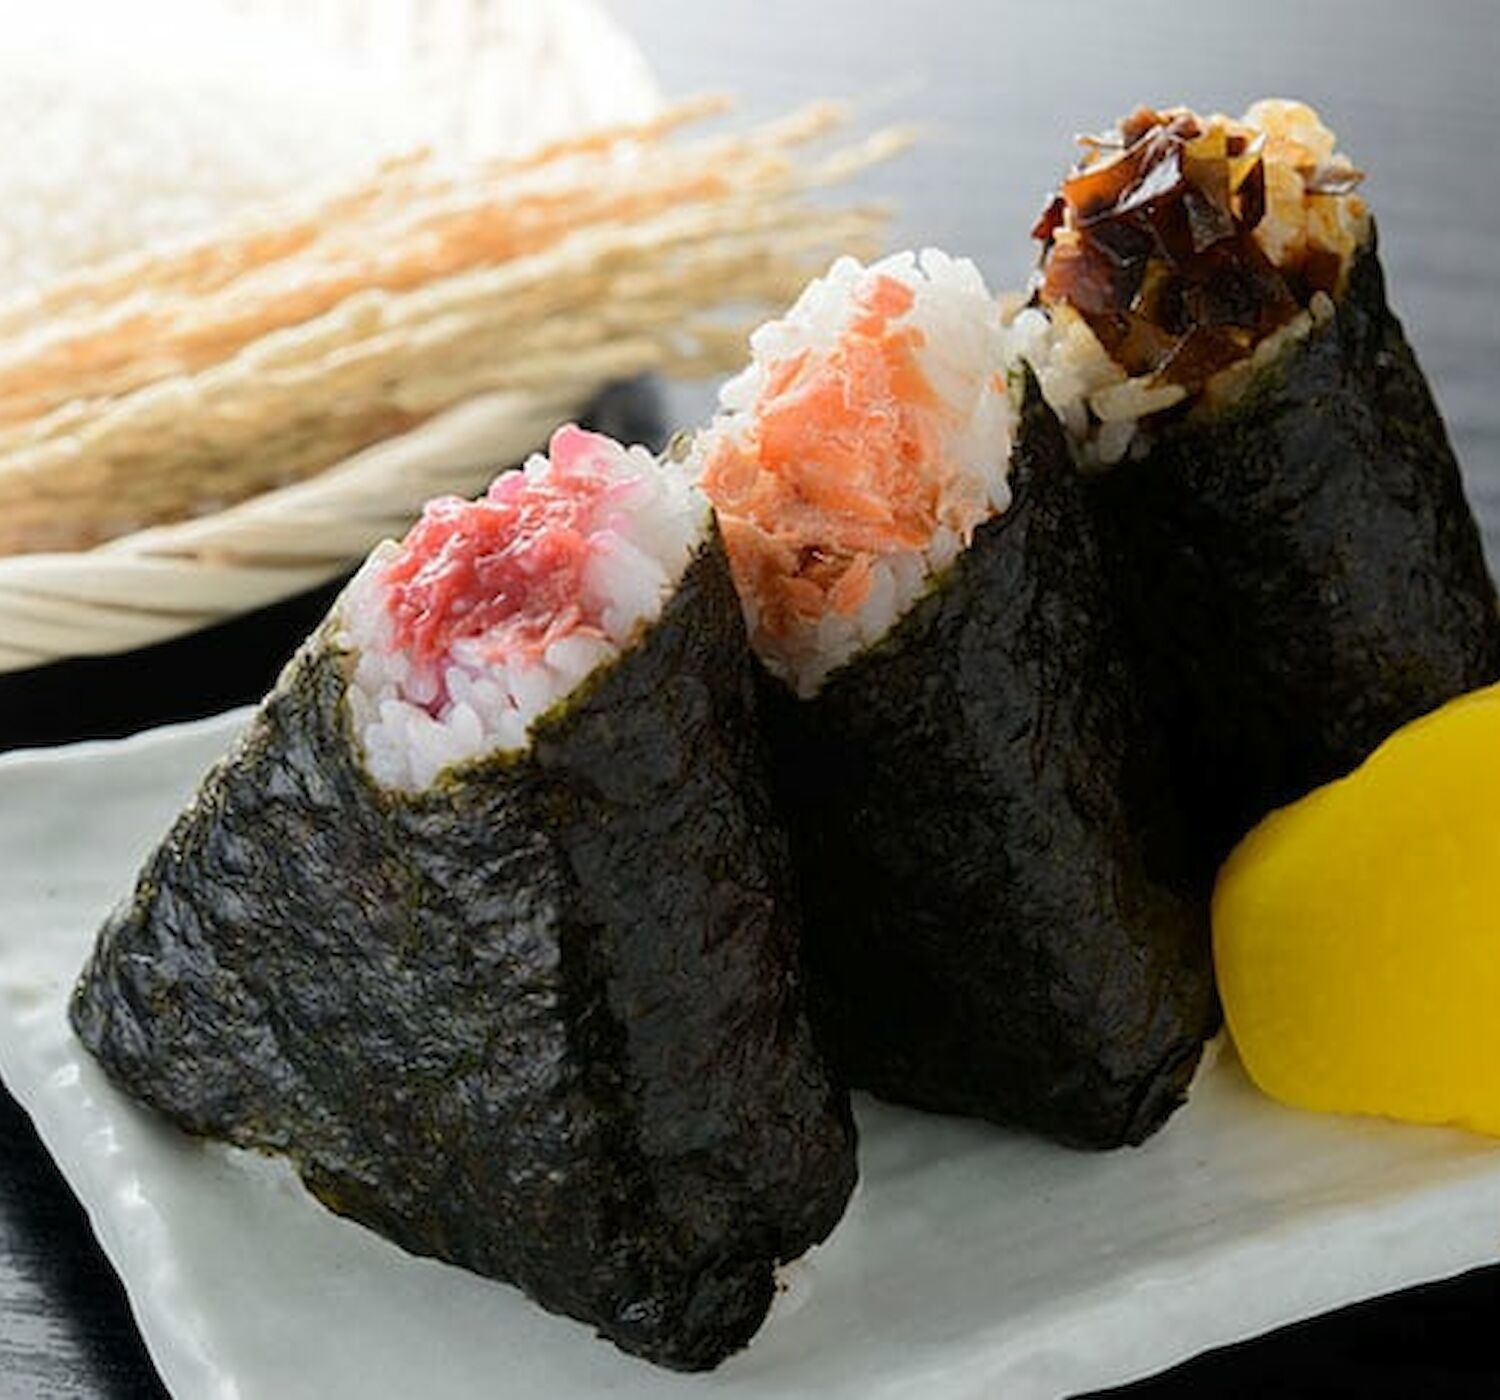 The image shows three onigiri wrapped in seaweed, each with different fillings, served with yellow pickles on a white plate, and a basket in the background.